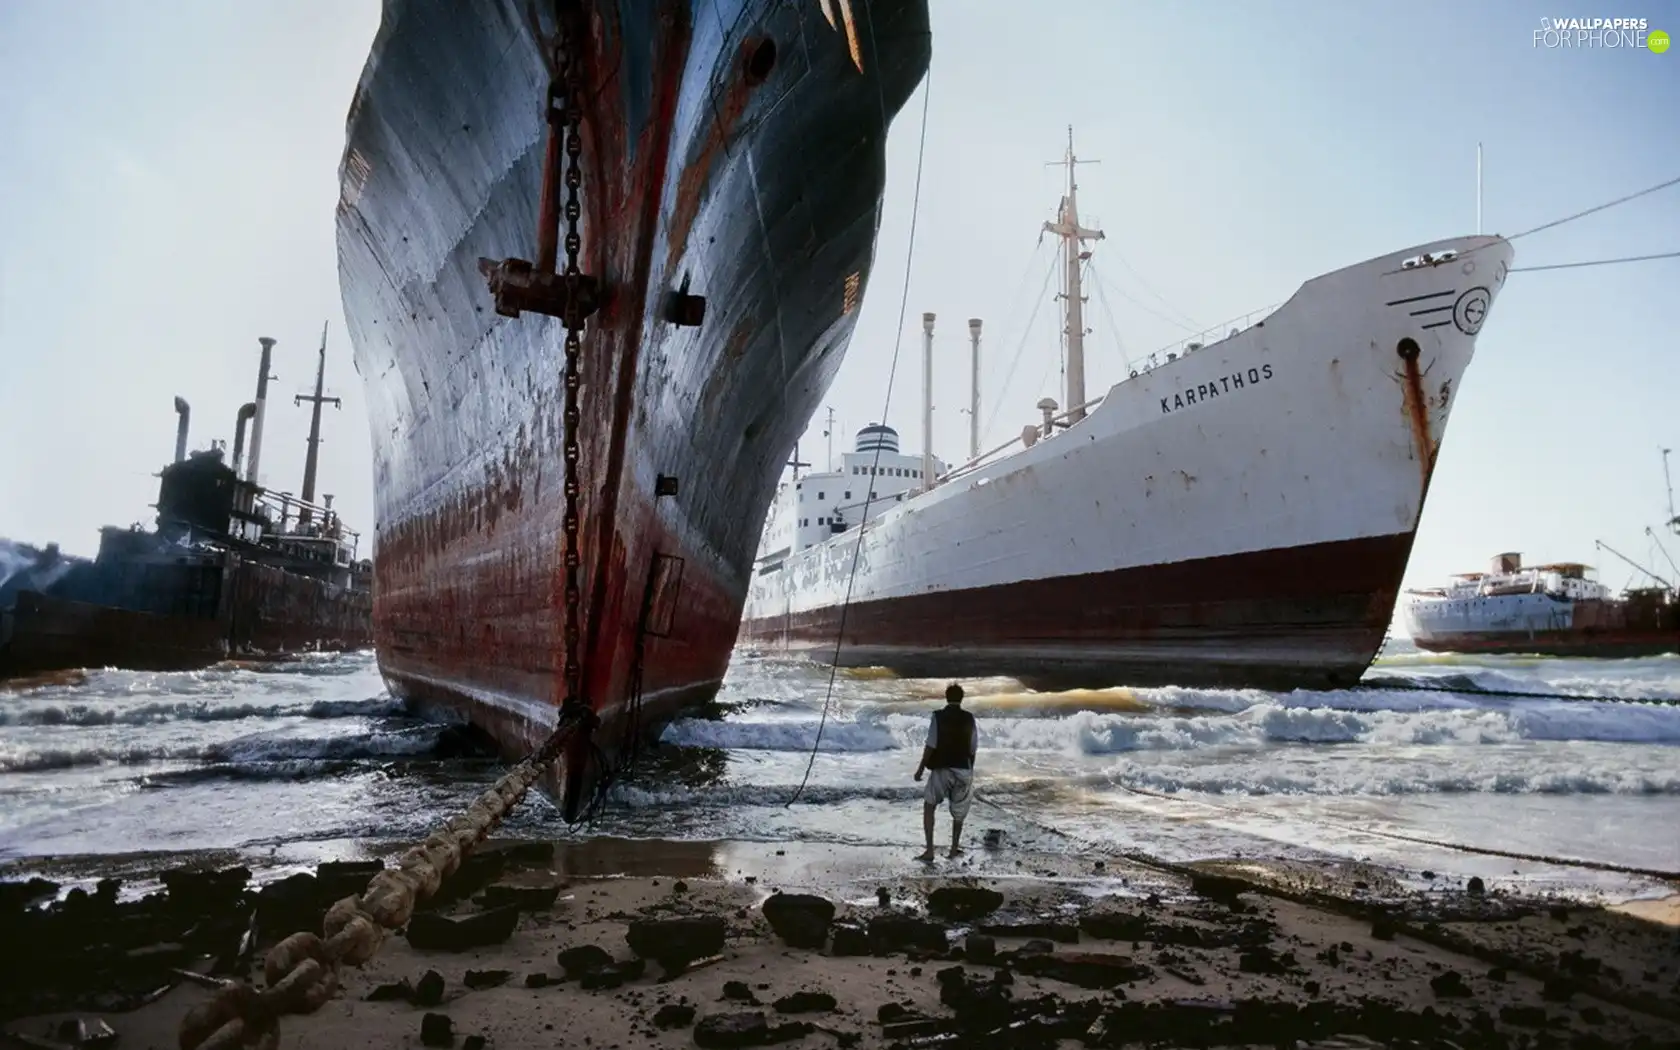 Beaches, vessels, scrapping